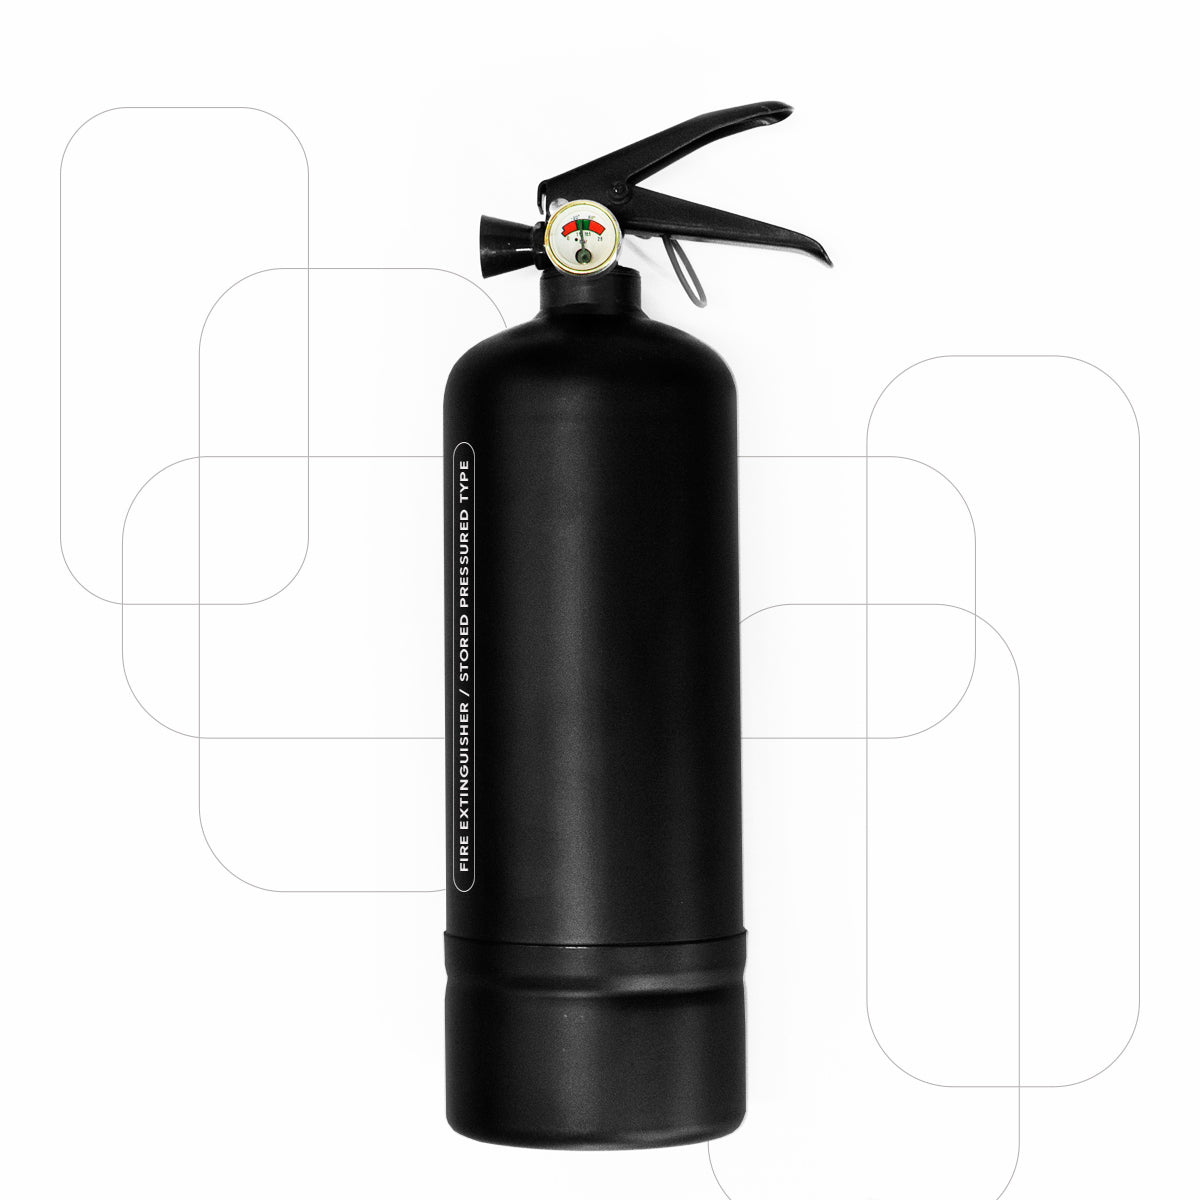 Personalised 1kg Fire Extinguisher